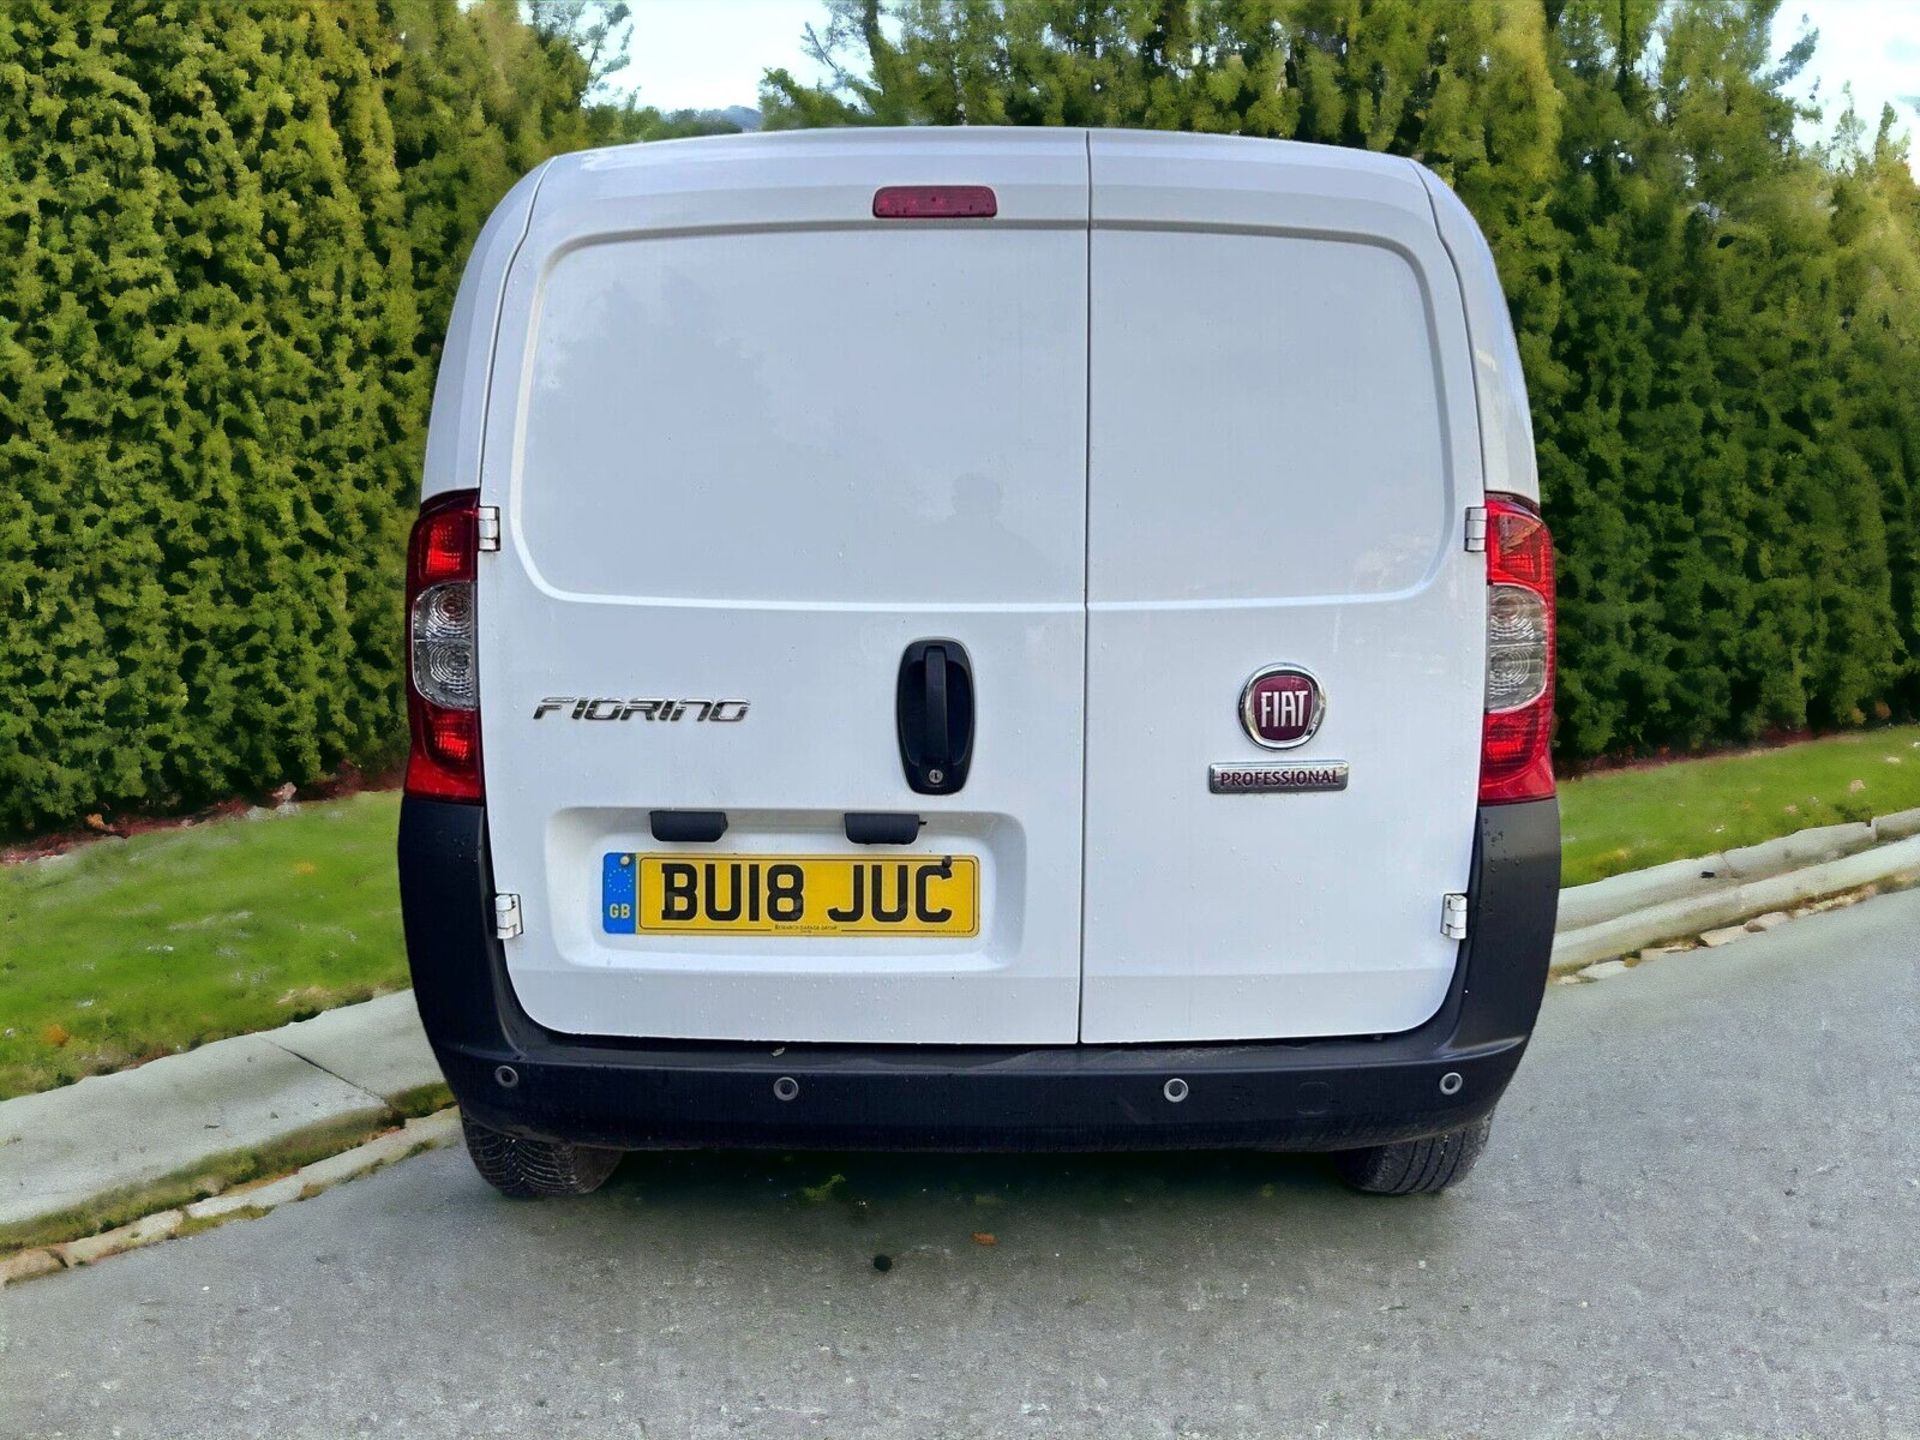 2018 FIAT FIORINO VAN - WELL-MAINTAINED, MOT UNTIL 04/2025, FULL SERVICE HISTORY - Image 4 of 6